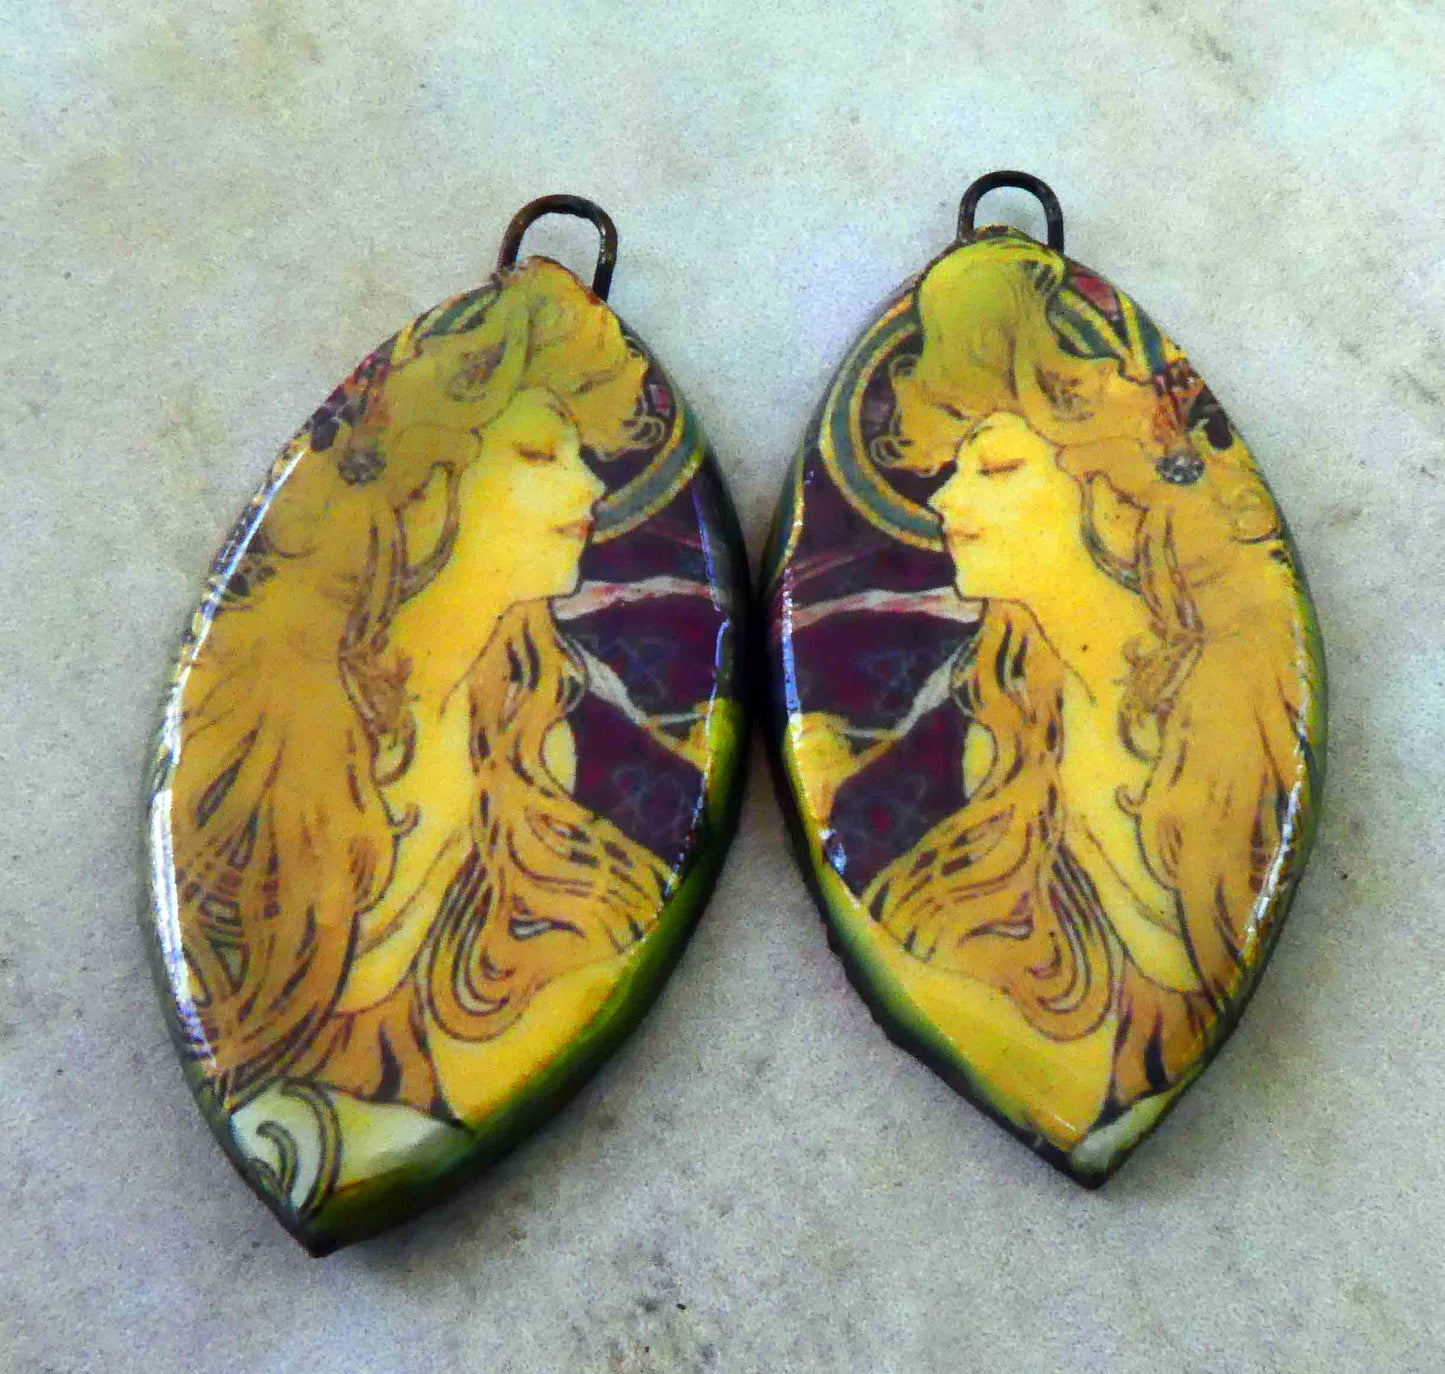 Ceramic Decal Mucha Earring Droppers #11